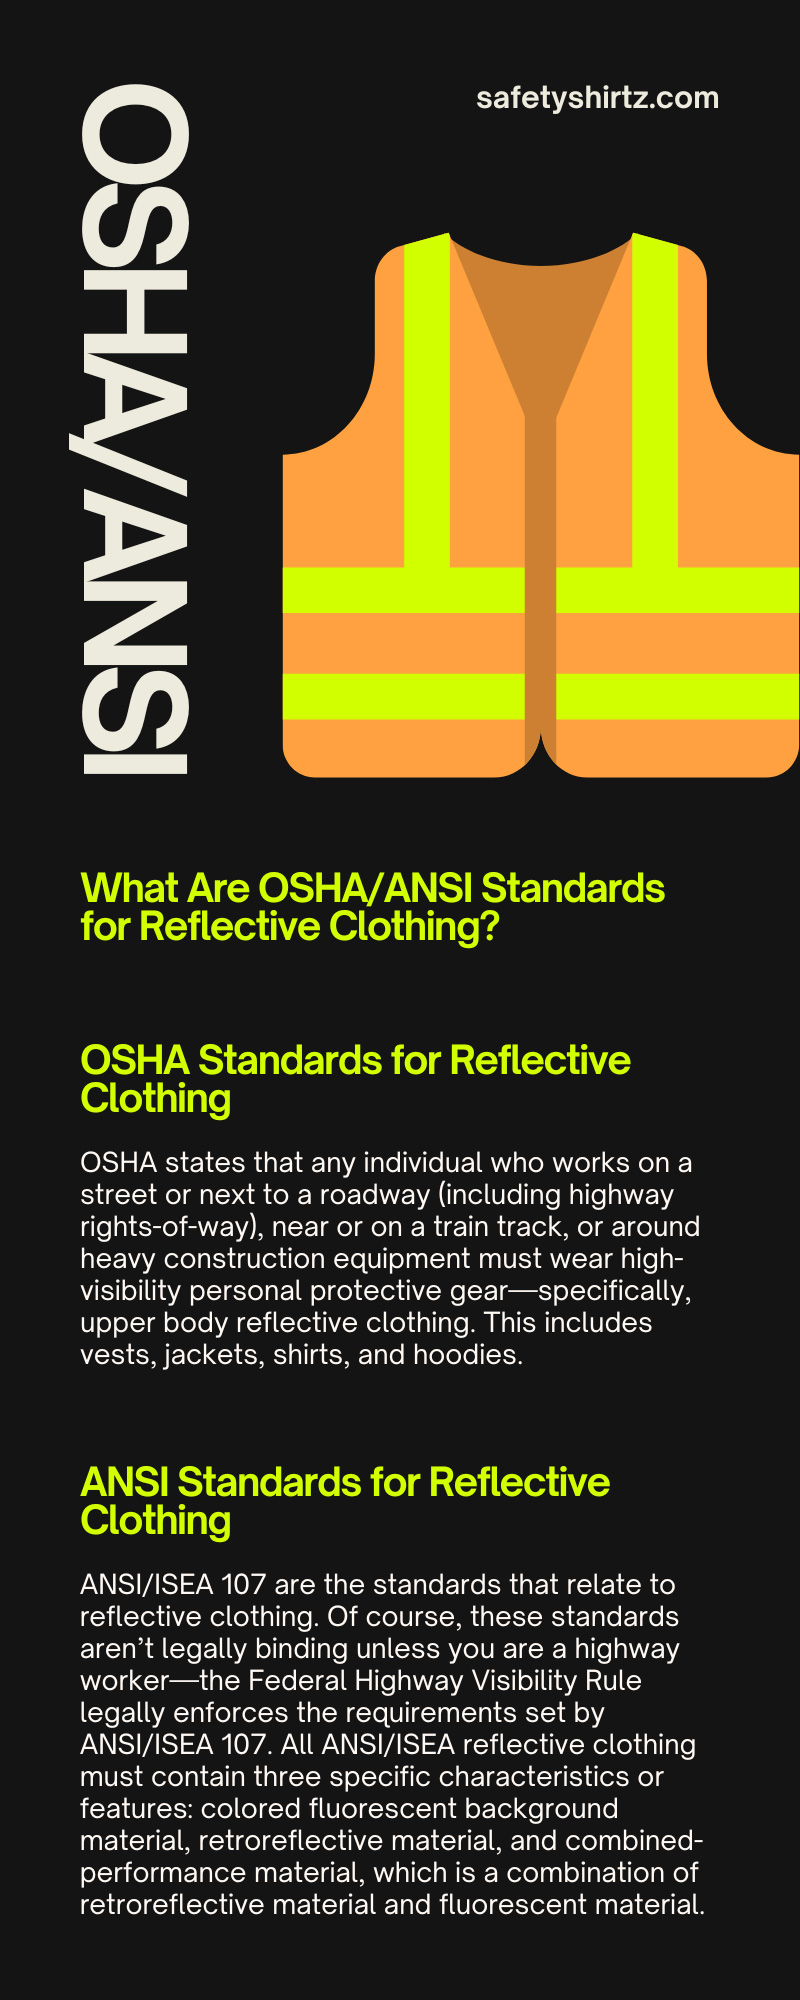 What Are OSHA/ANSI Standards for Reflective Clothing?